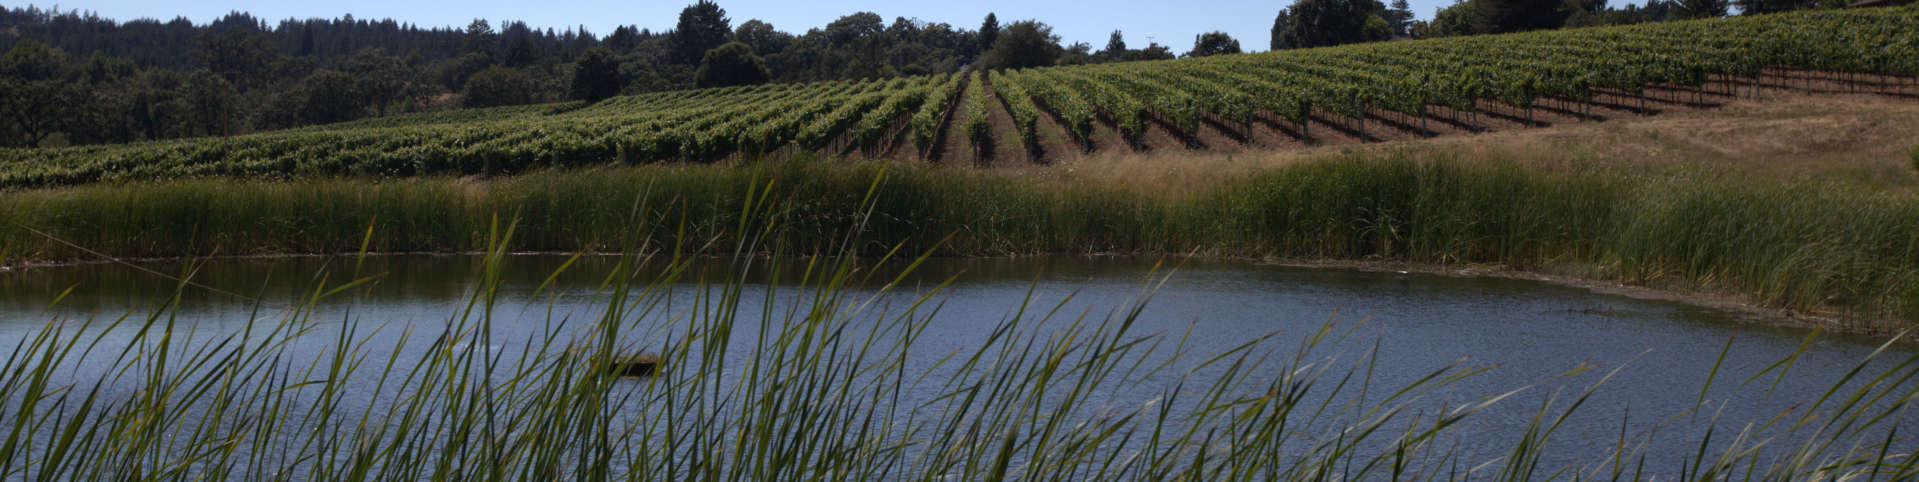 View of Keefer Ranch Vineyard and pond in Green Valley, California